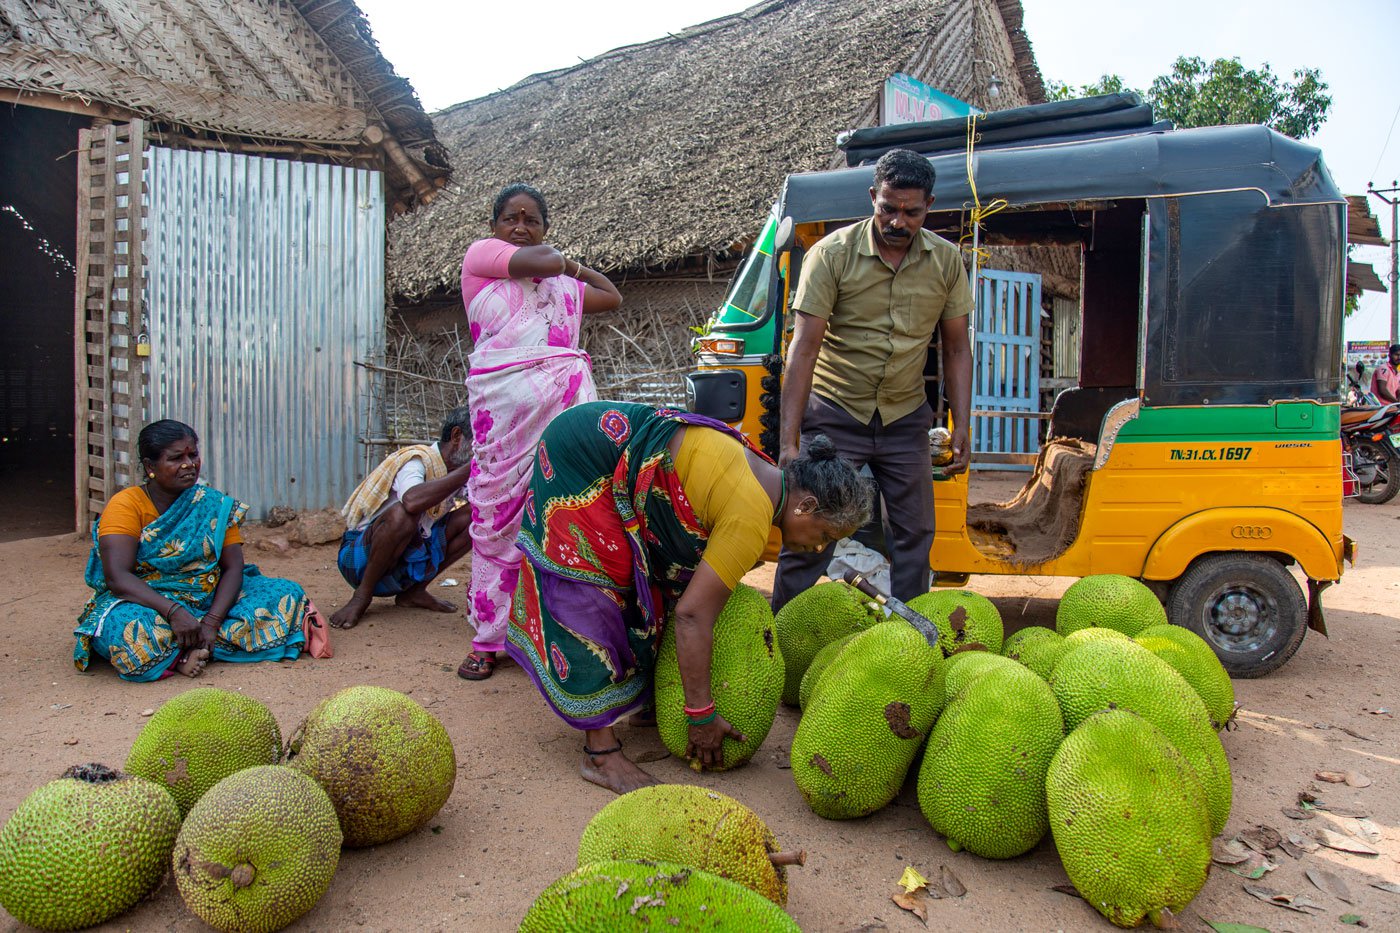 Lakshmi is in great demand during the season because people know she sources the best fruit